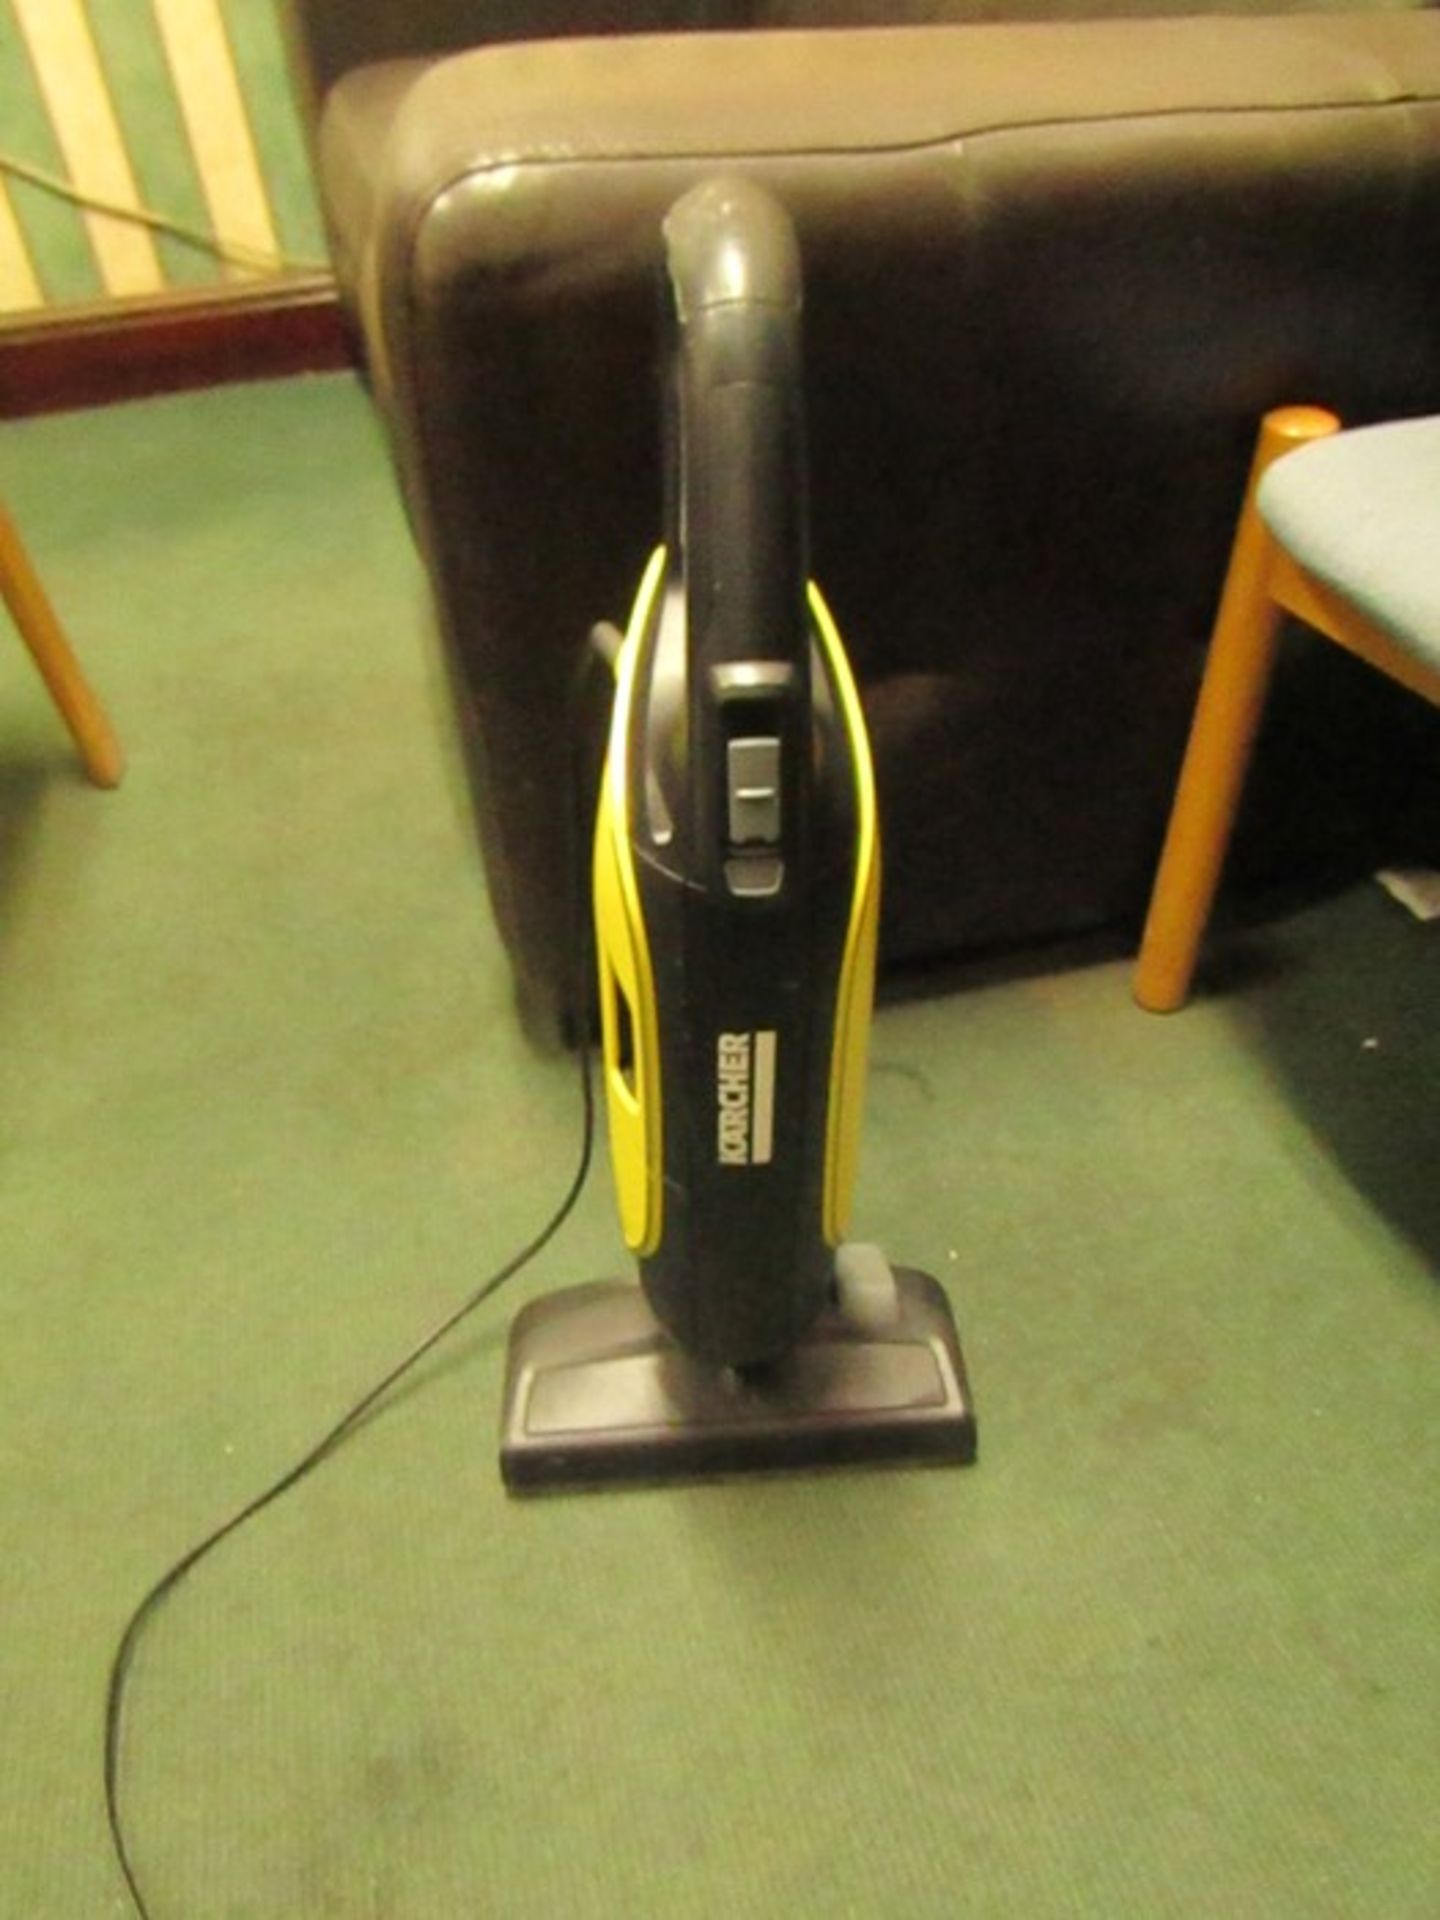 Karcher VC 5 vacuum cleaner, tested working but has minor cosmetic damage that does not affect use.